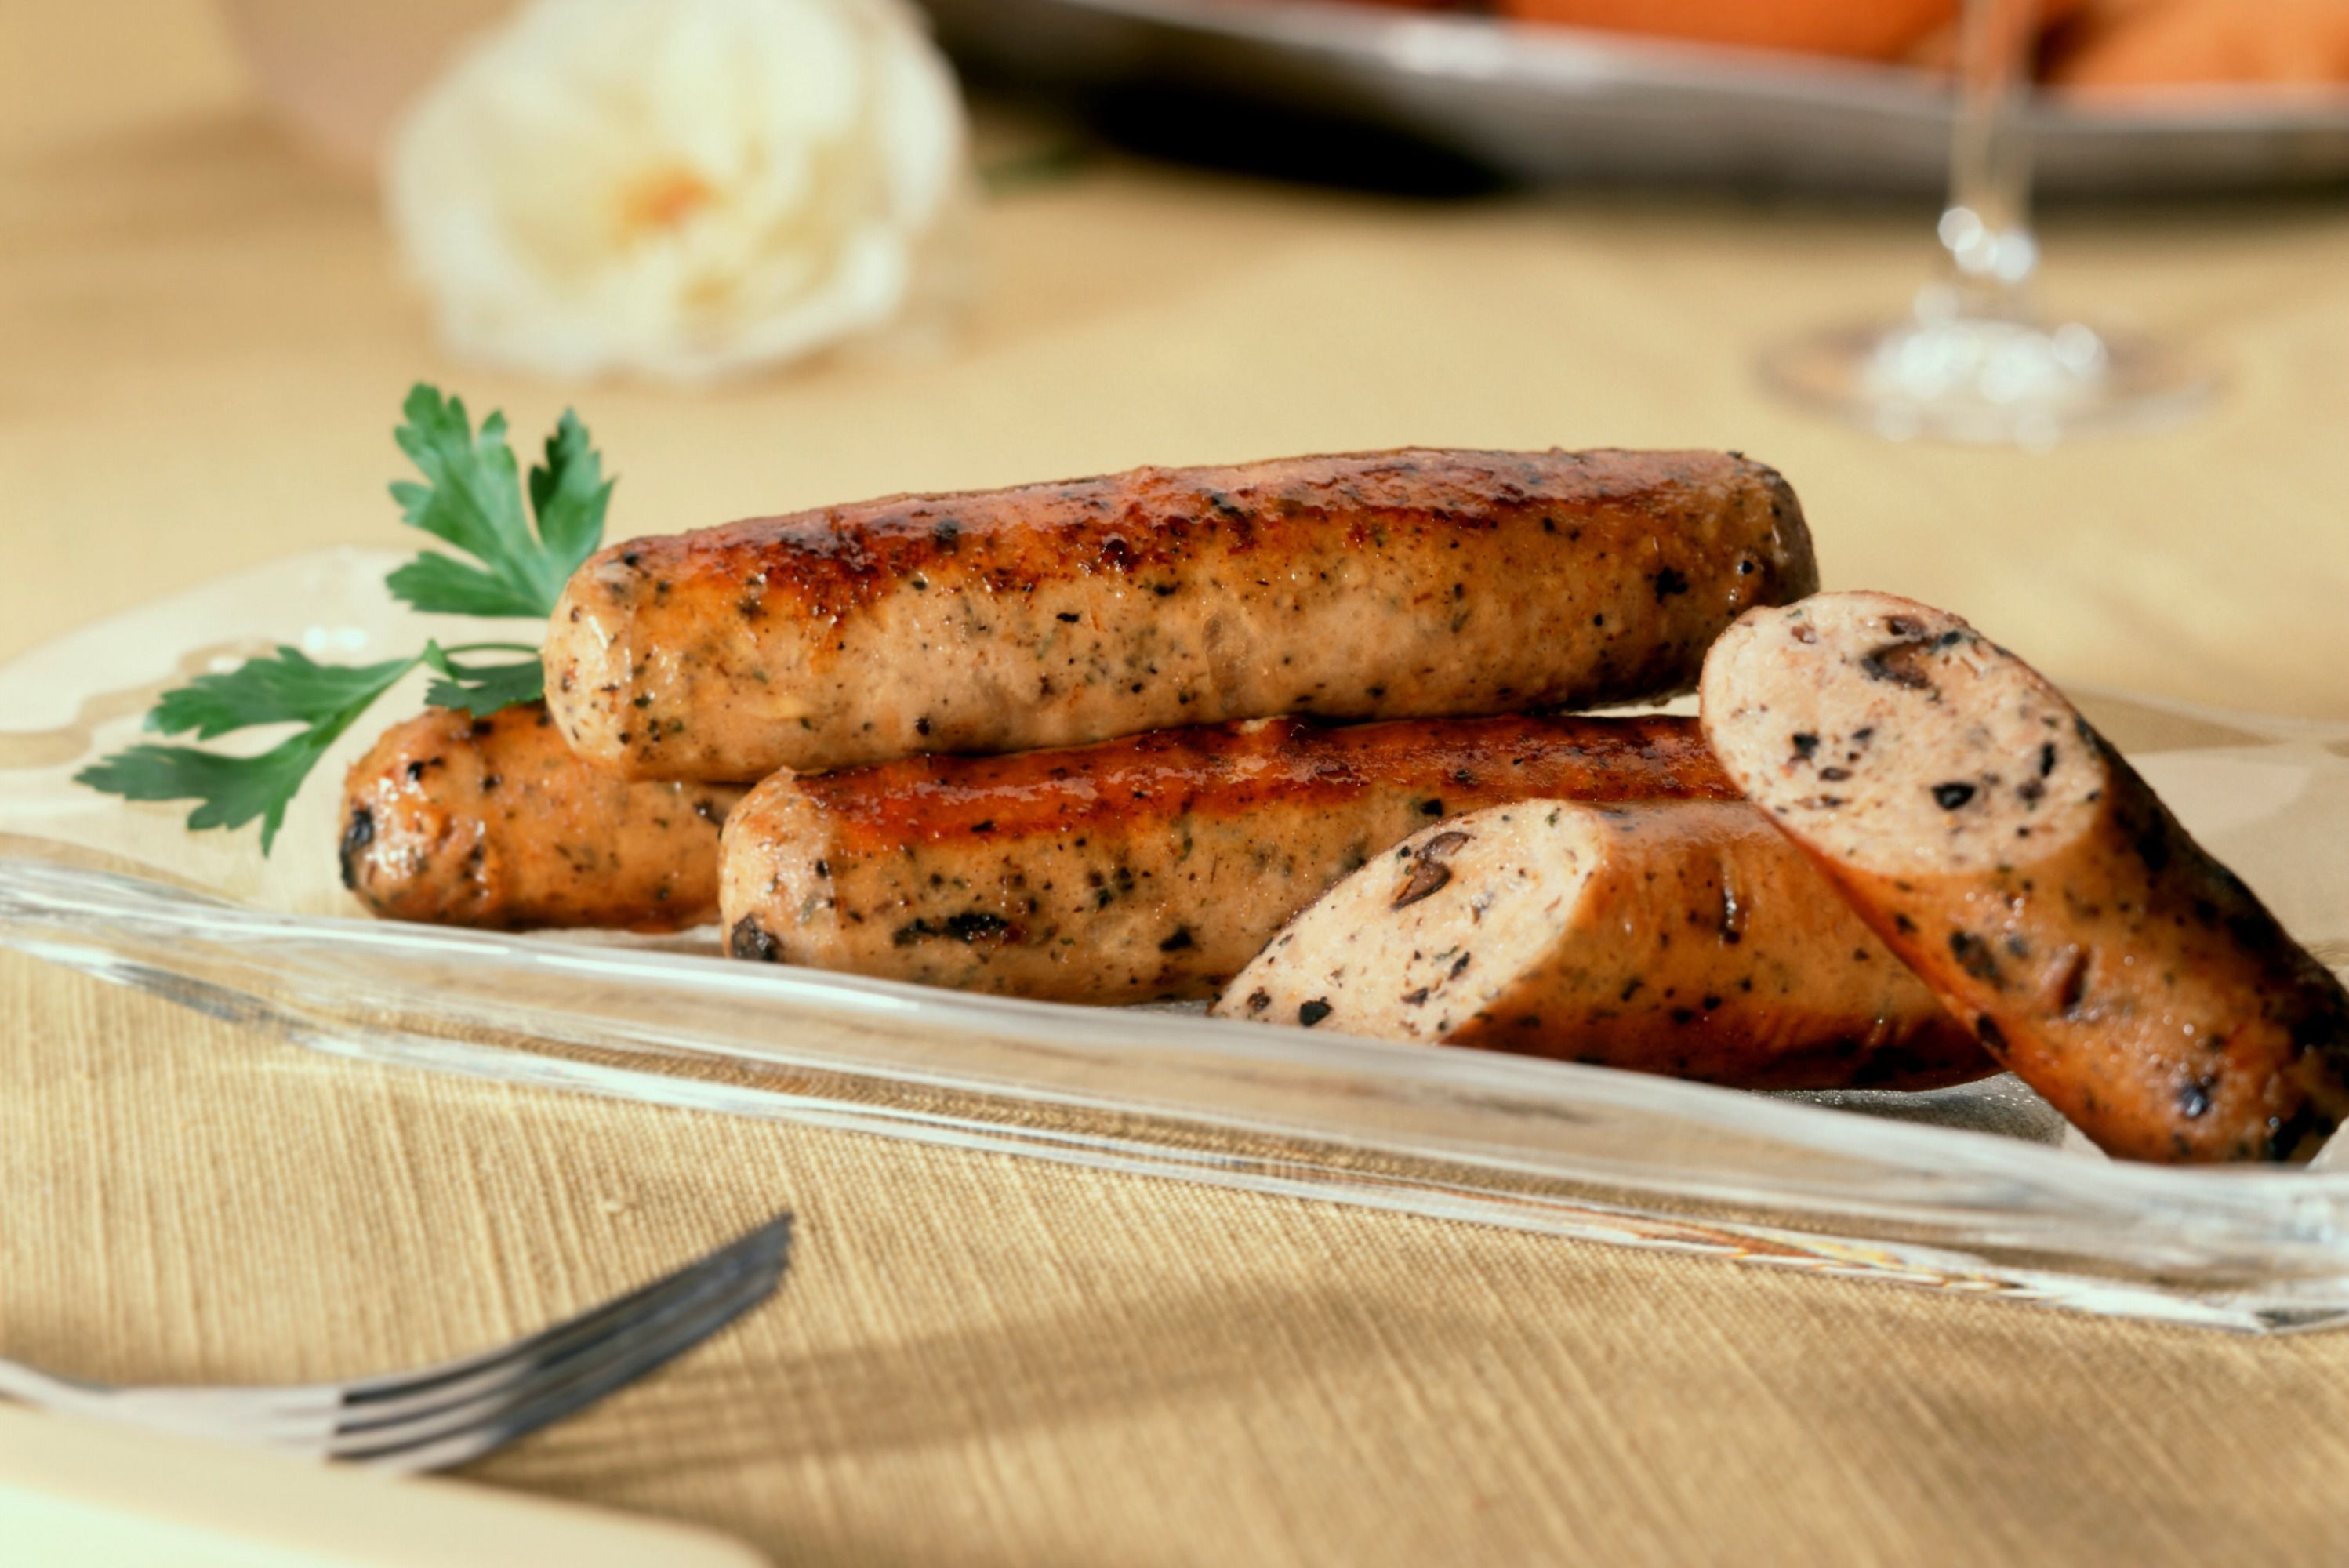 How To Make Chicken Sausage
 How to Make Your Own Healthy Sausage